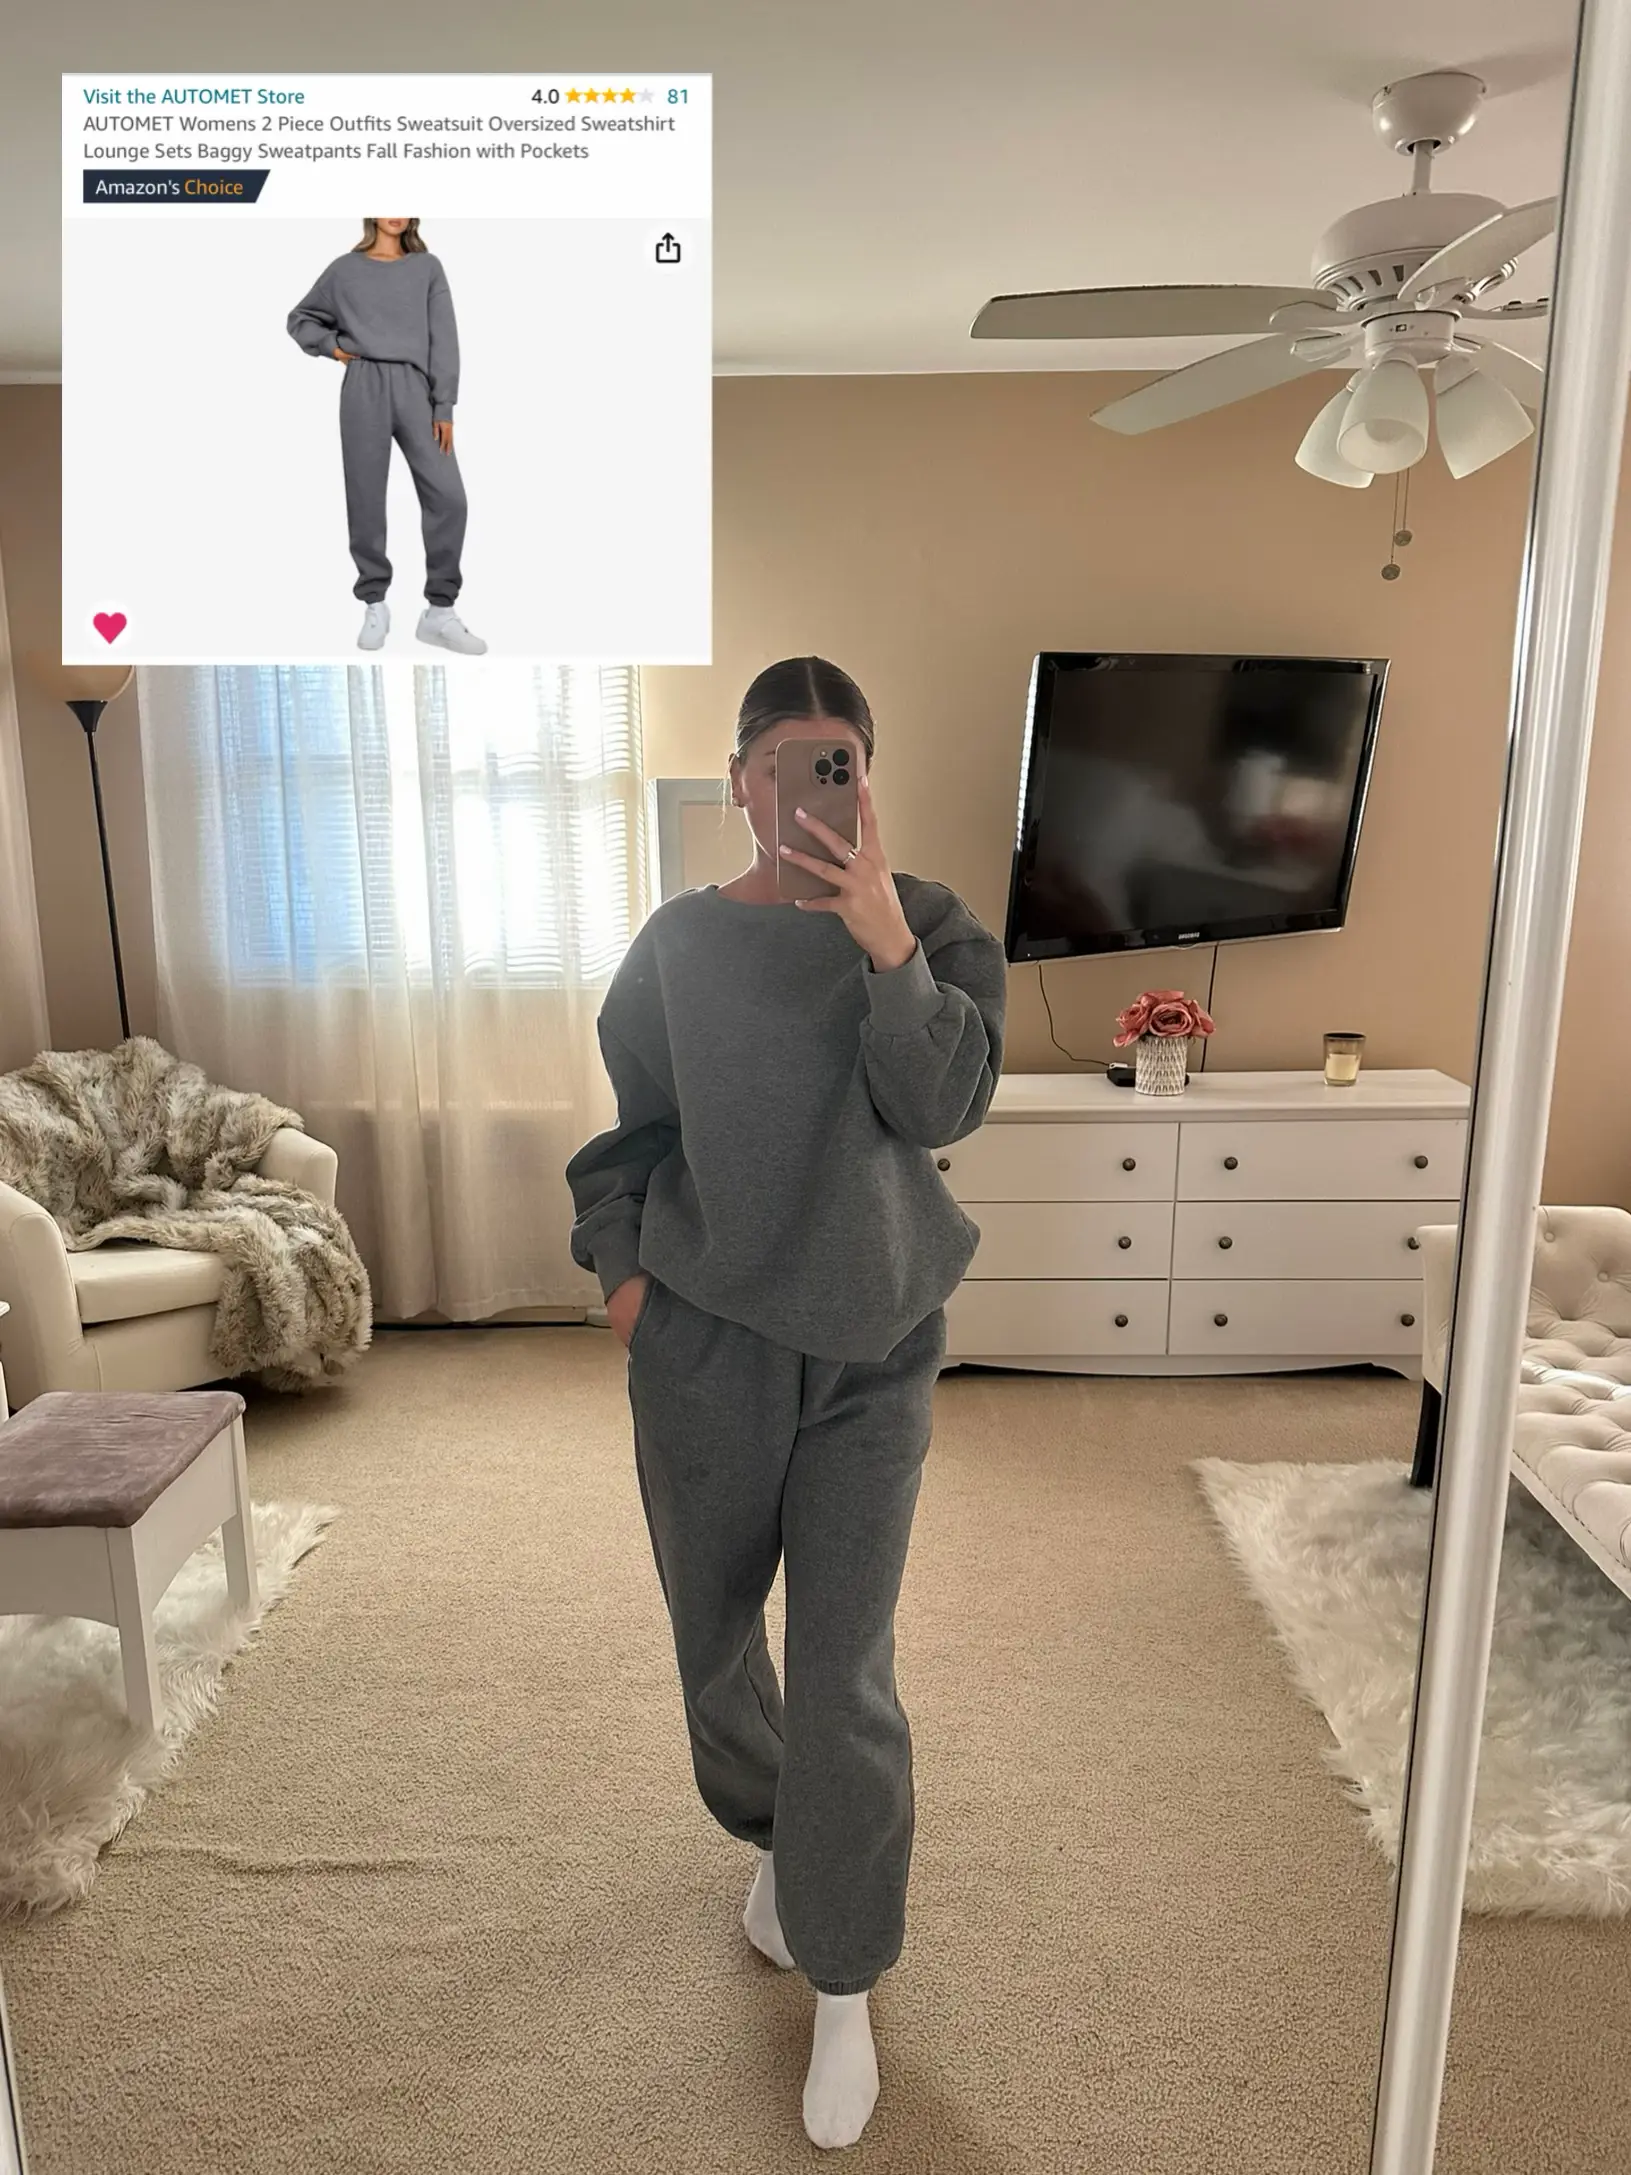 🥰 Colsie is at it again with a new velvet loungewear set! They're rea